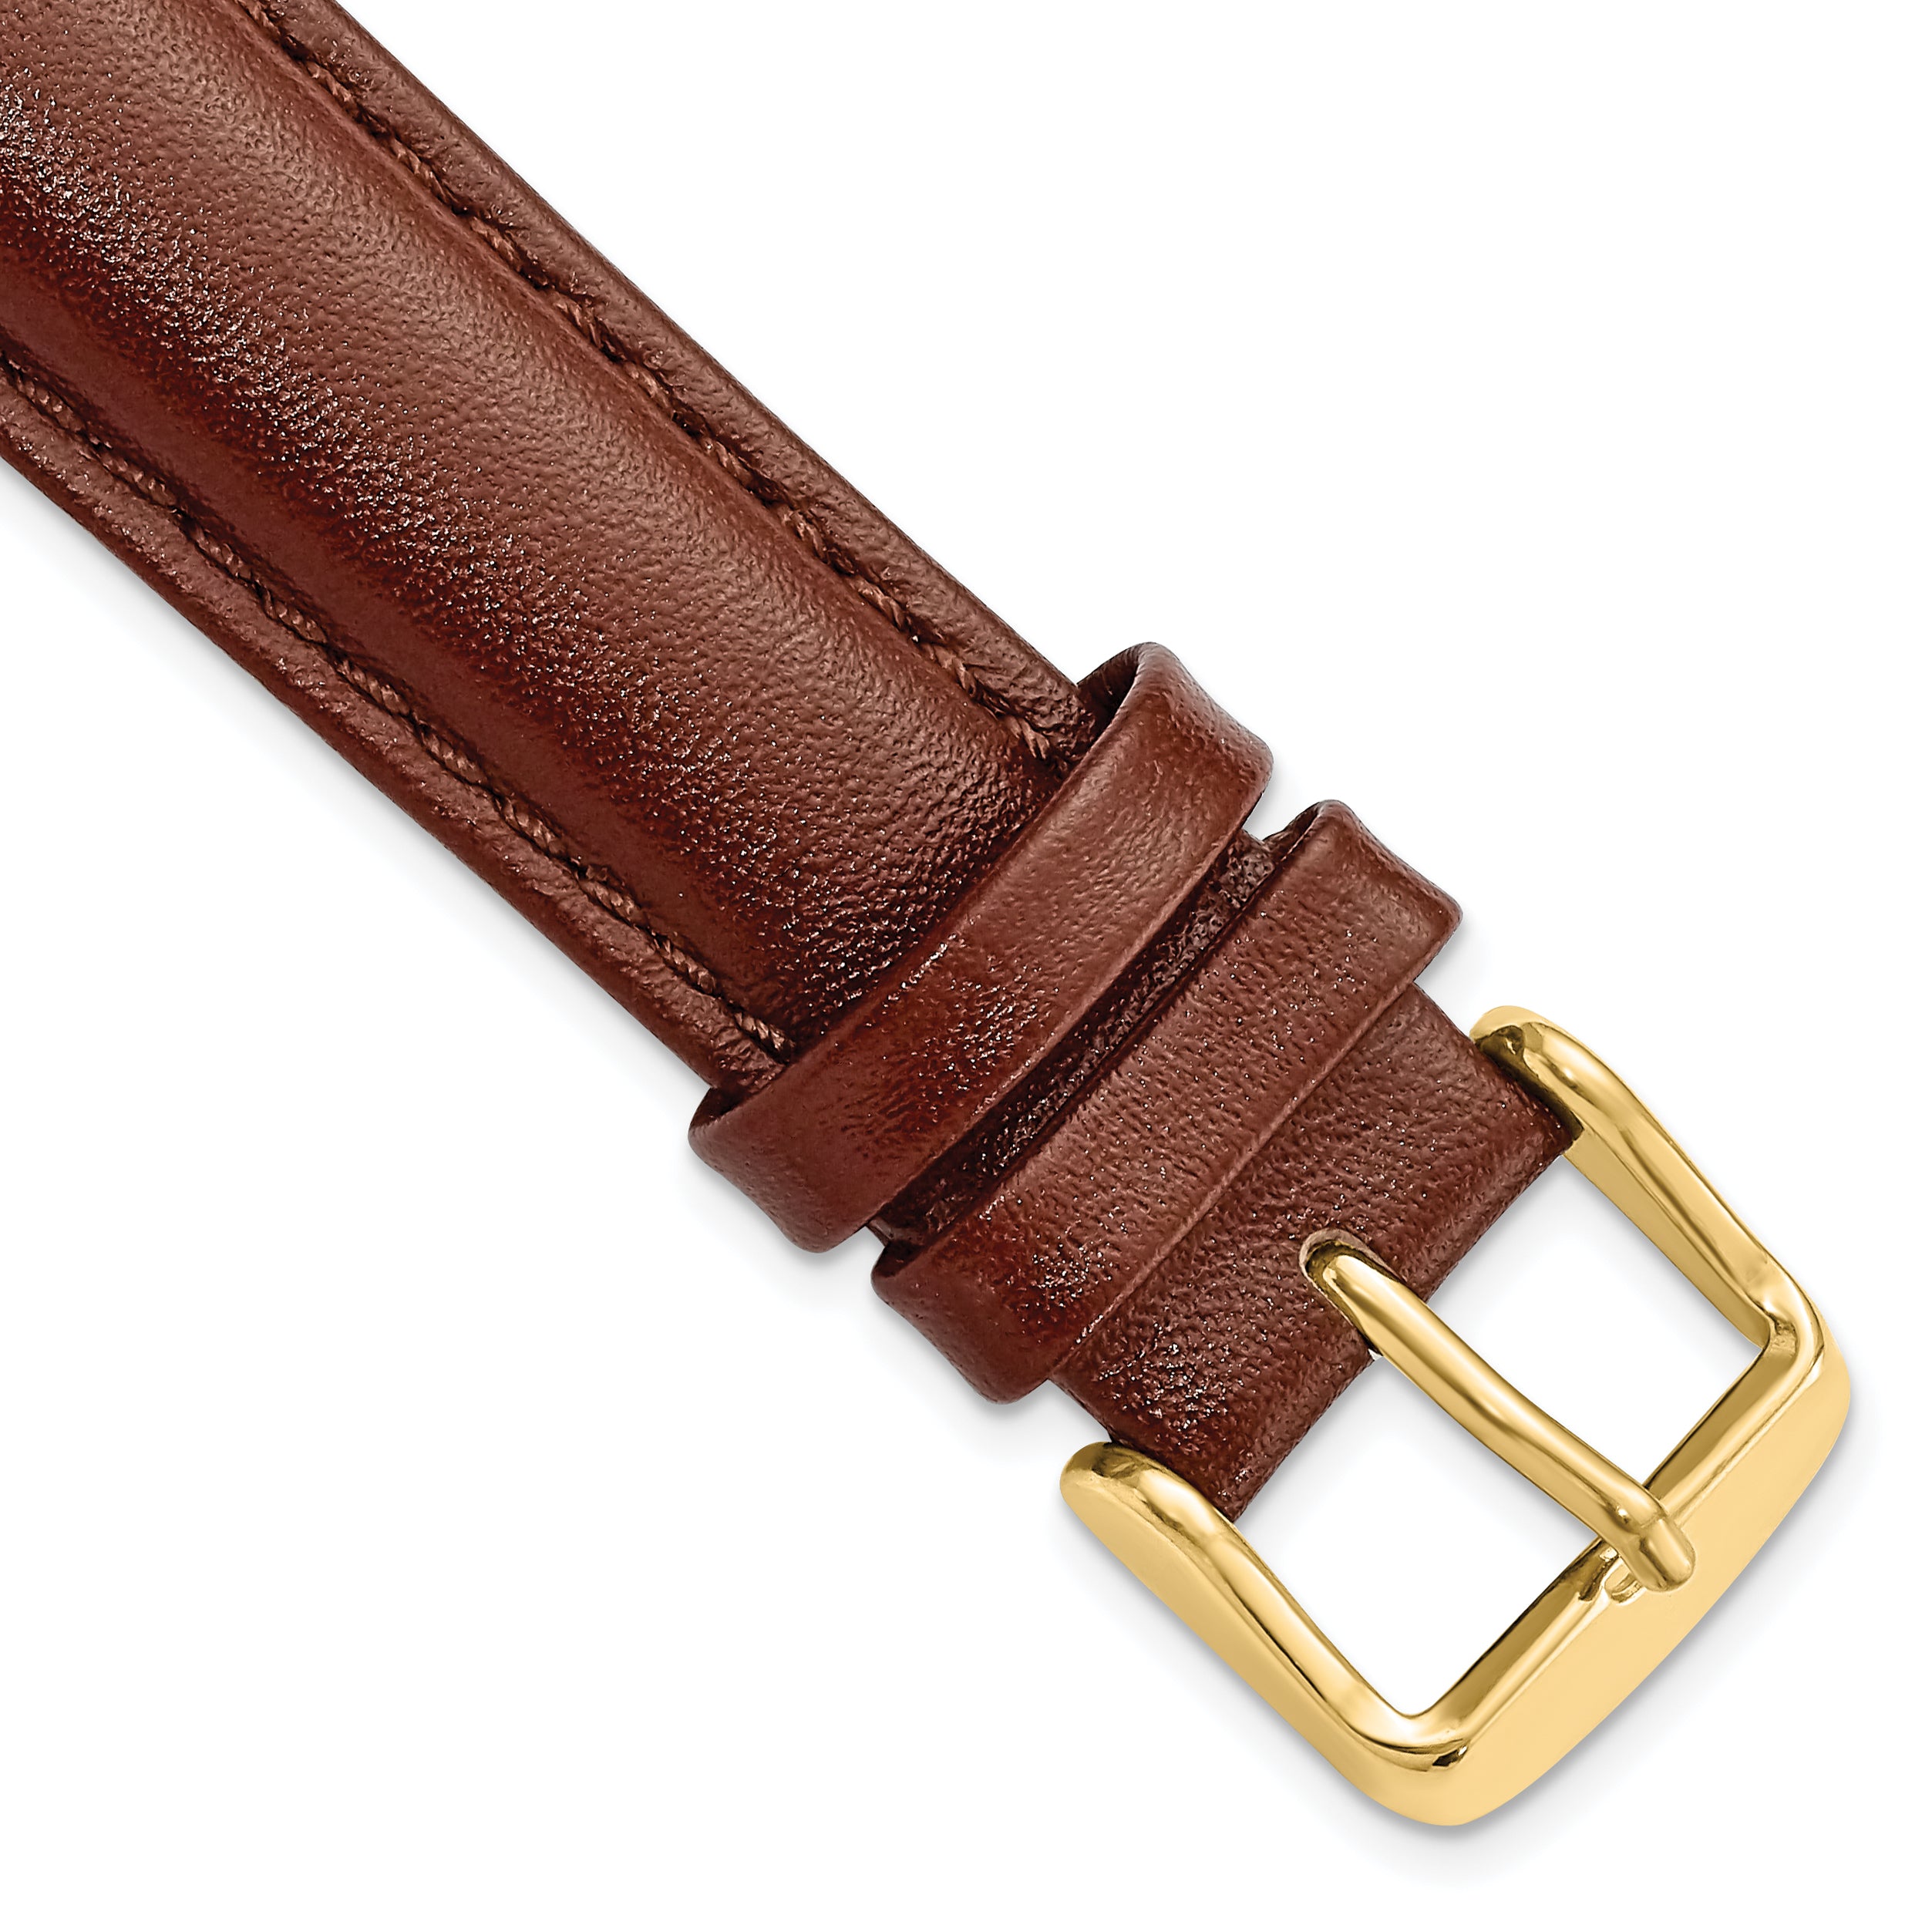 DeBeer 18mm Havana Smooth Leather Chronograph with Gold-tone Buckle 7.5 inch Watch Band